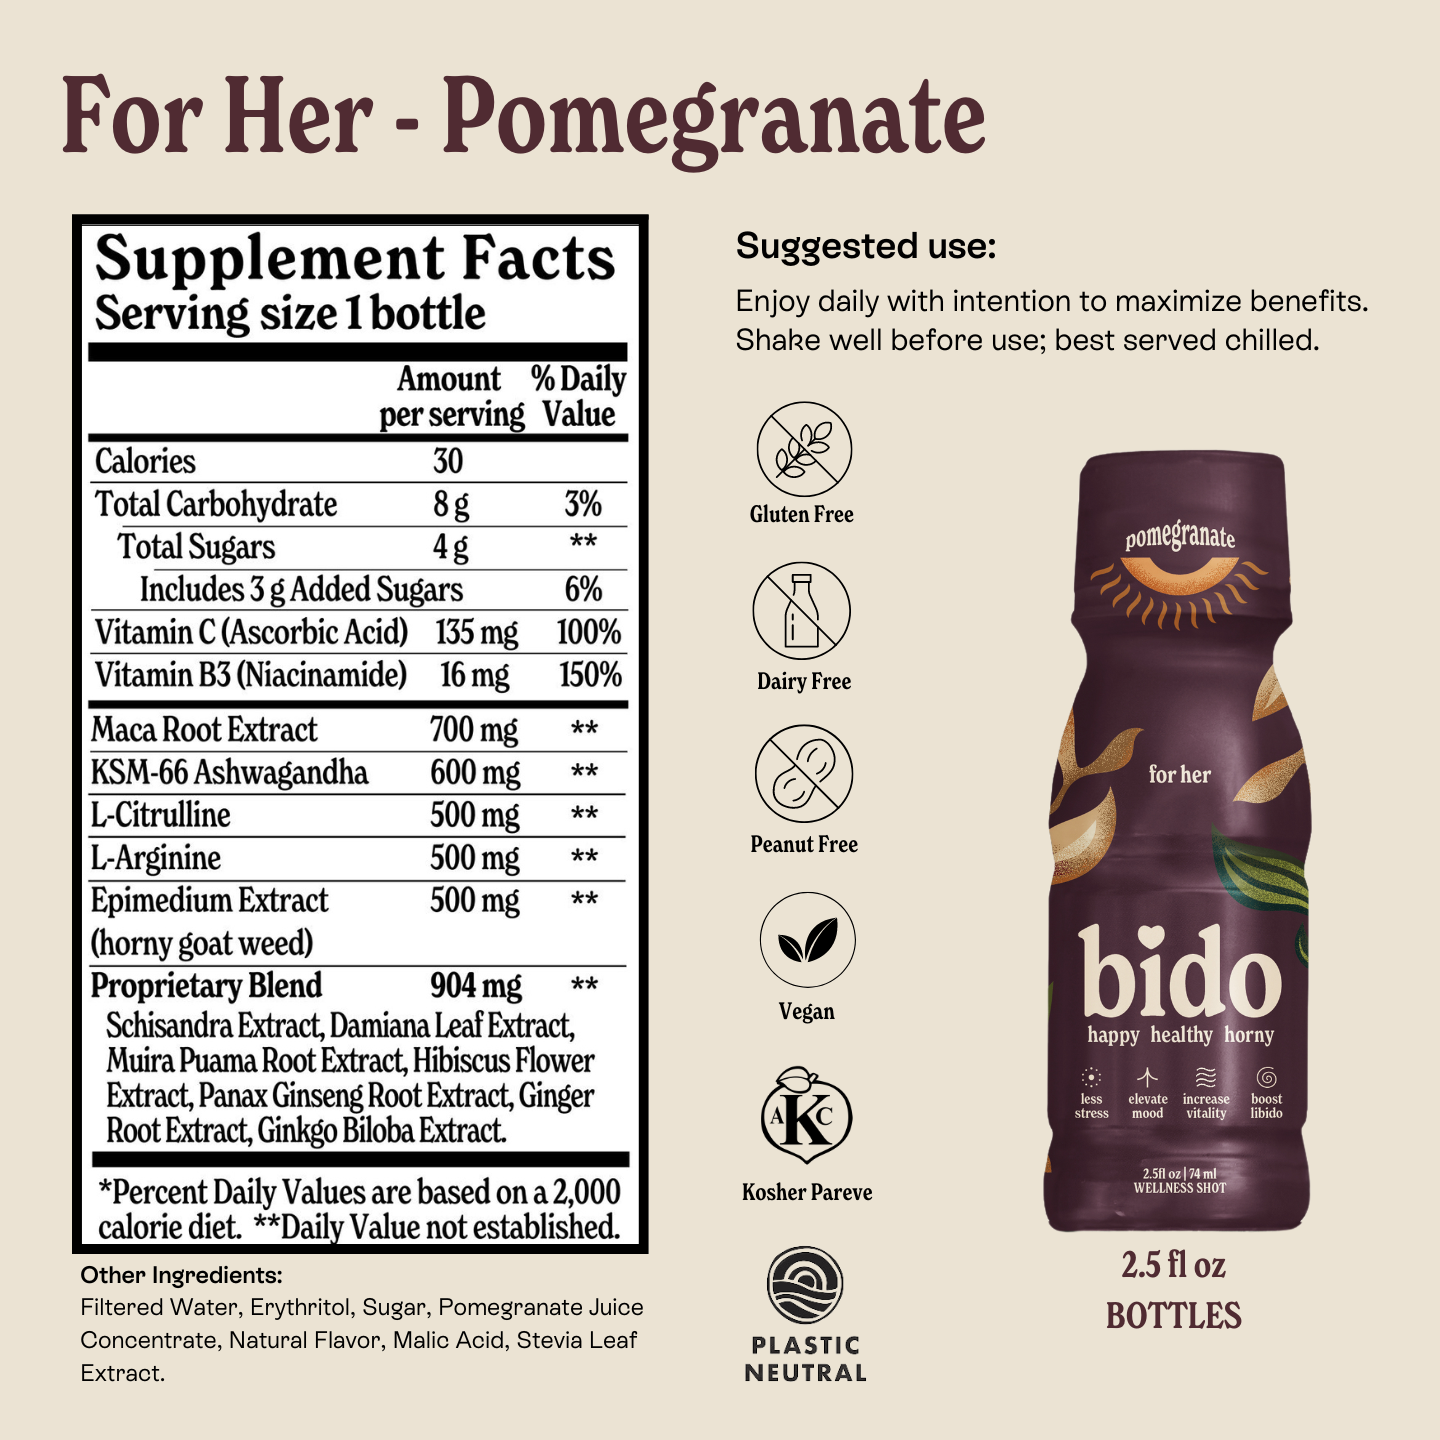 Image of a pomegranate supplement bottle label with nutrition facts and dietary icons.